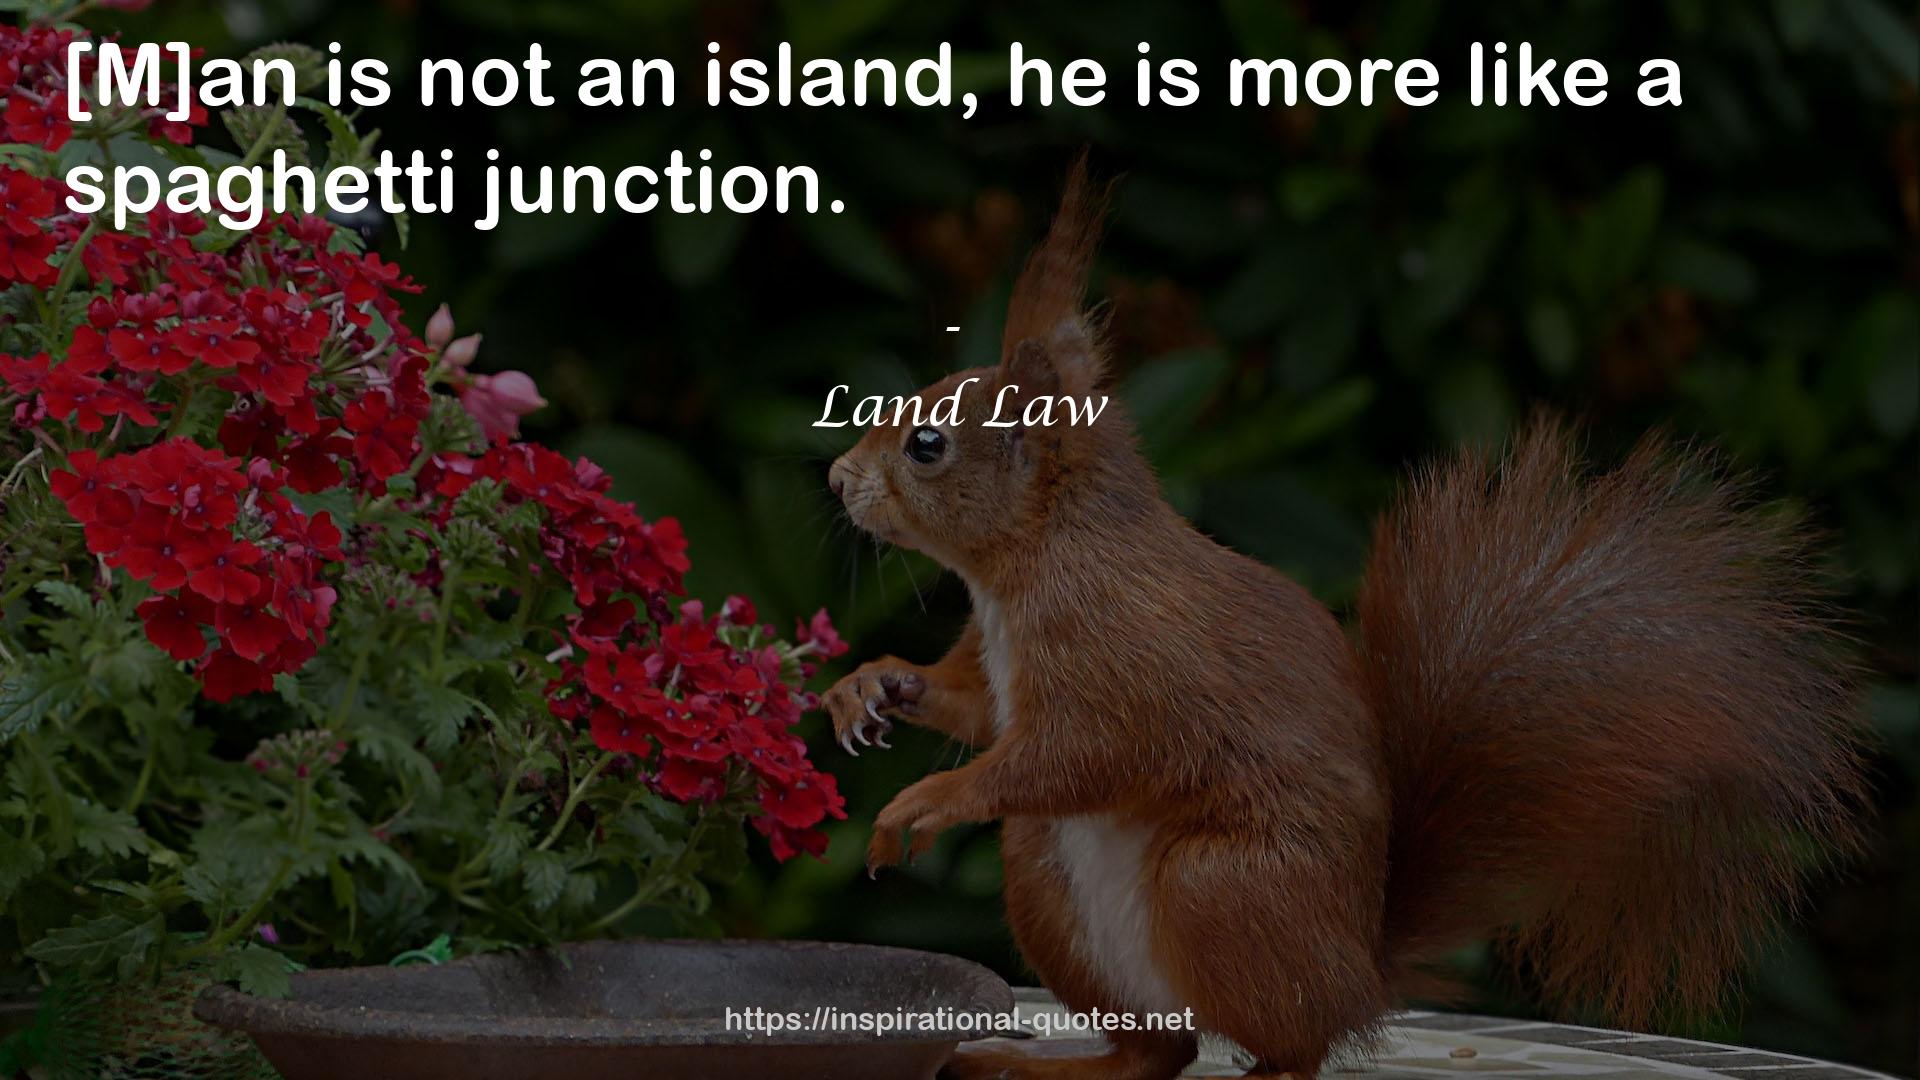 Land Law QUOTES